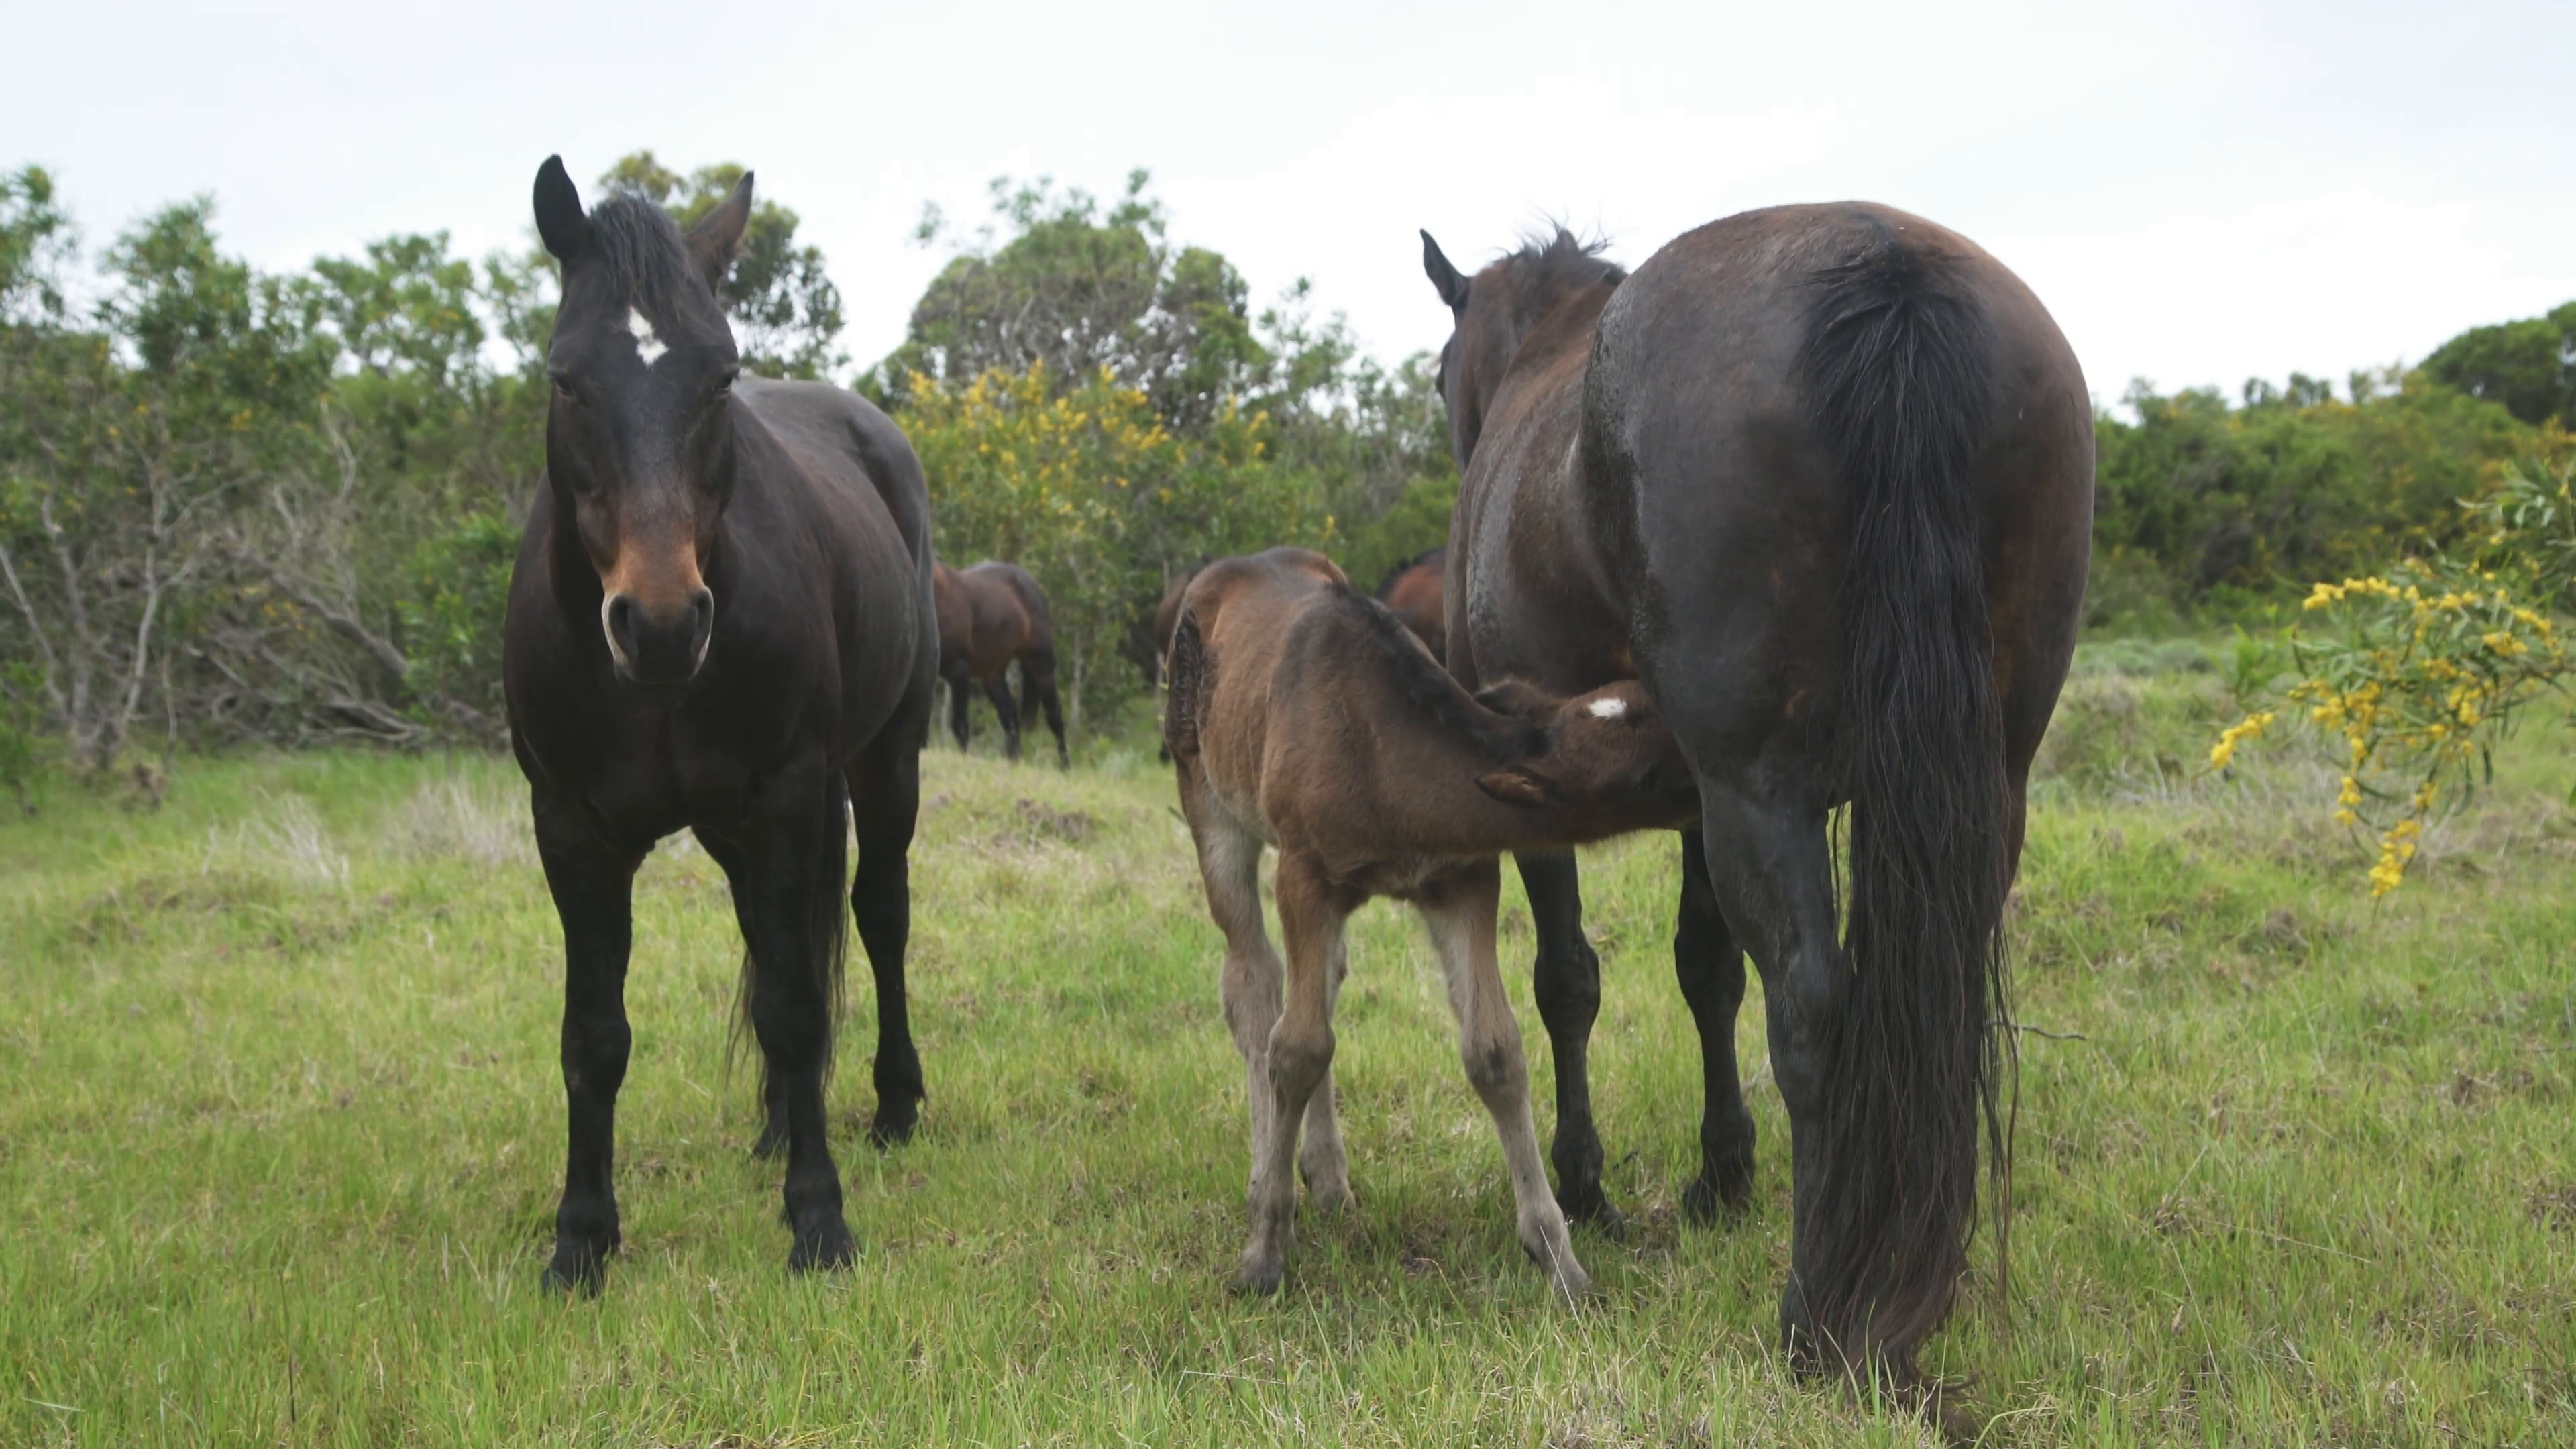 Brown Black Horses in Field, Baby Horse Feeding from Mother, Foal ...